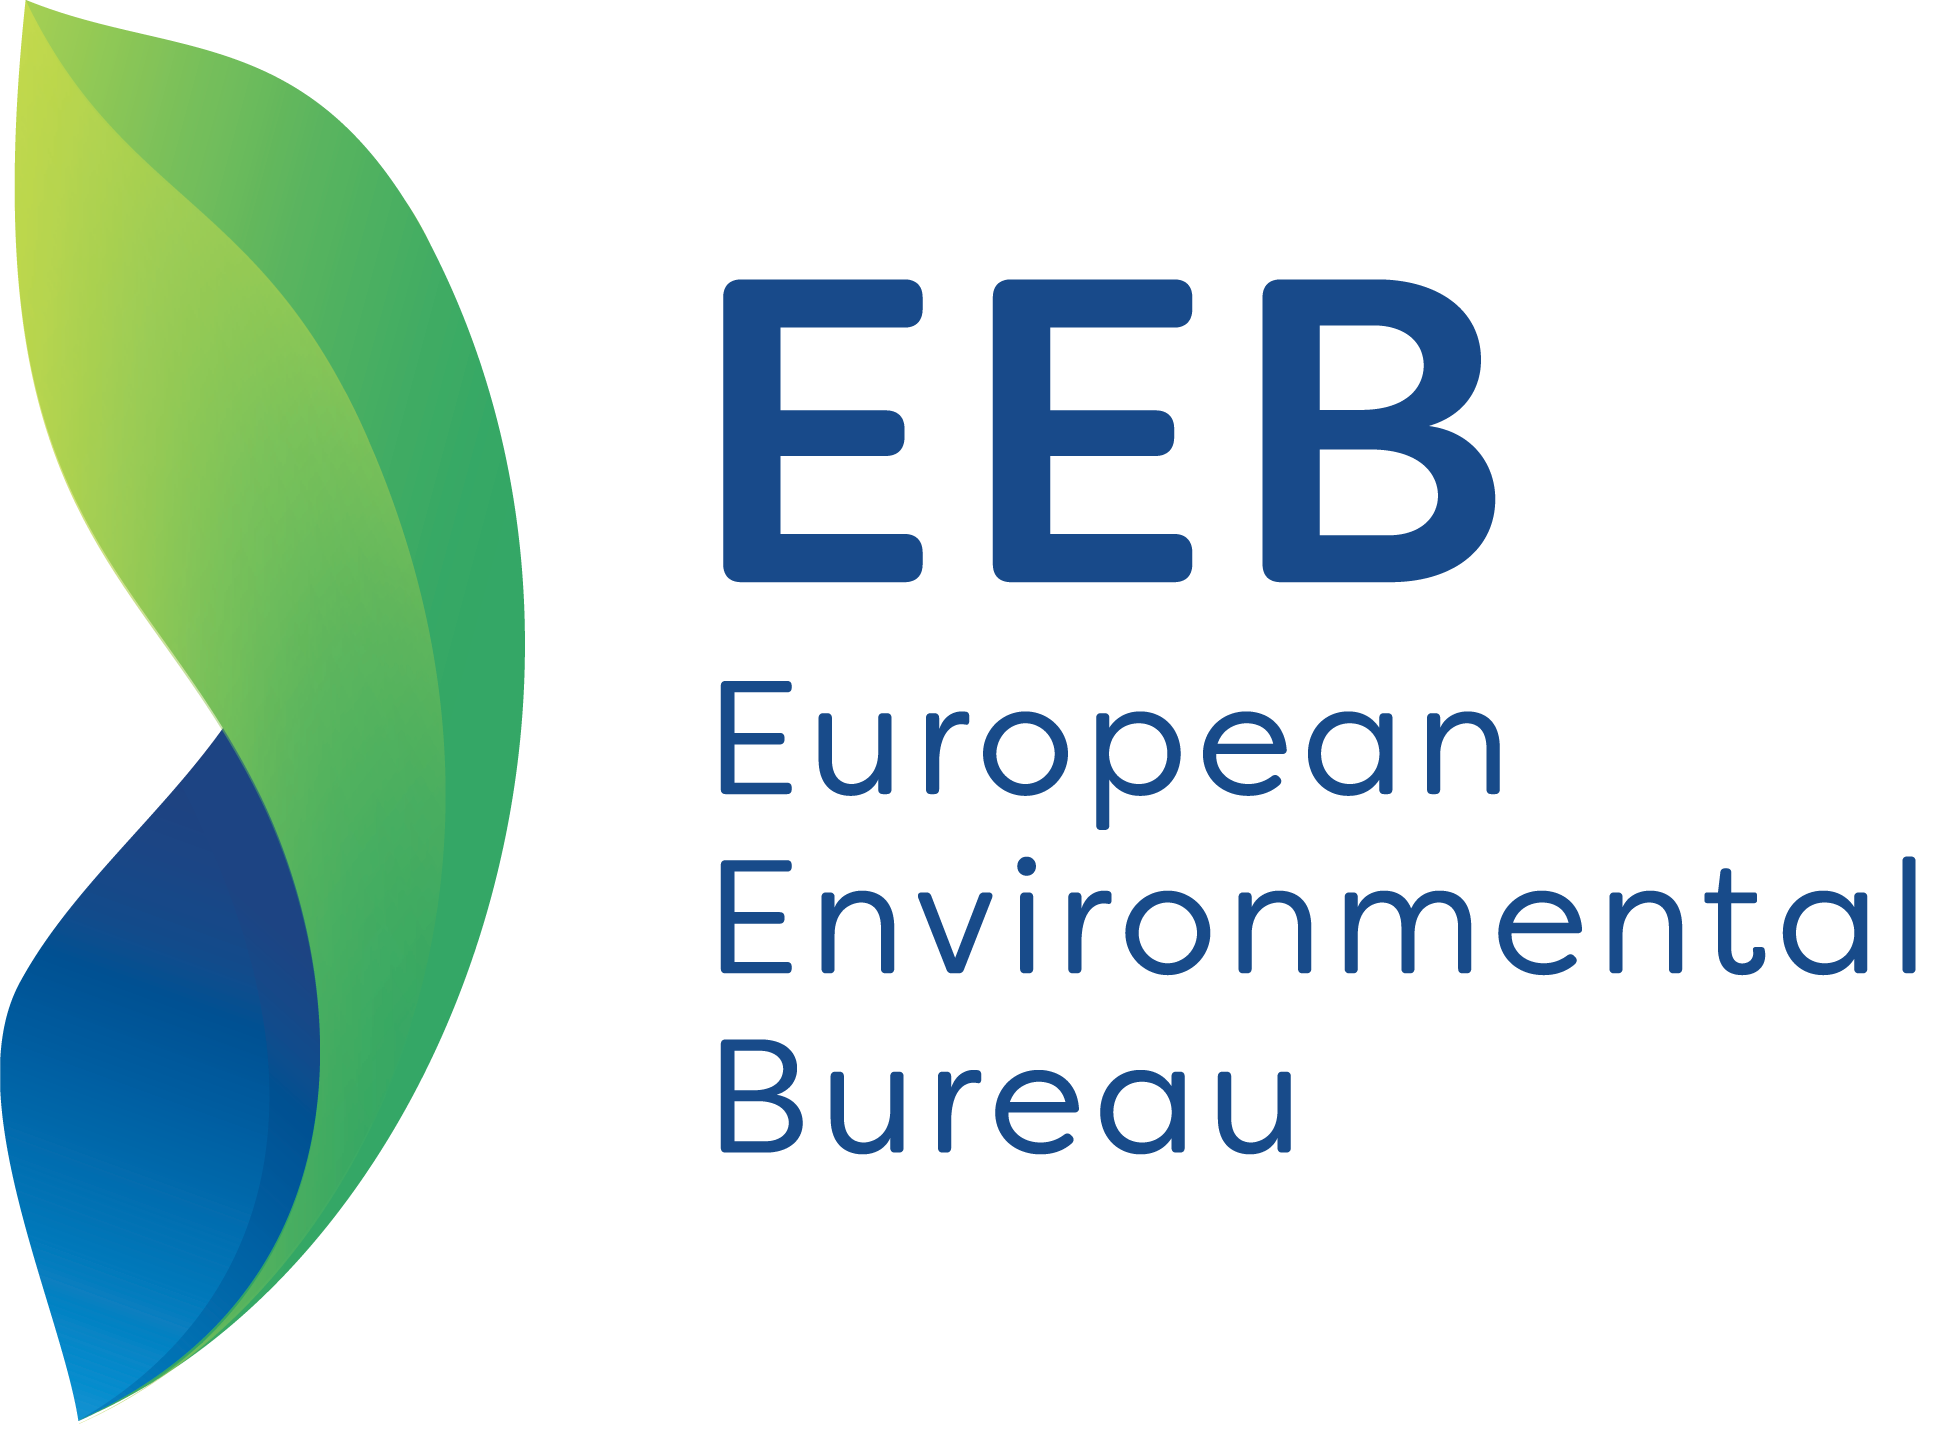 The image shows the EEB logo